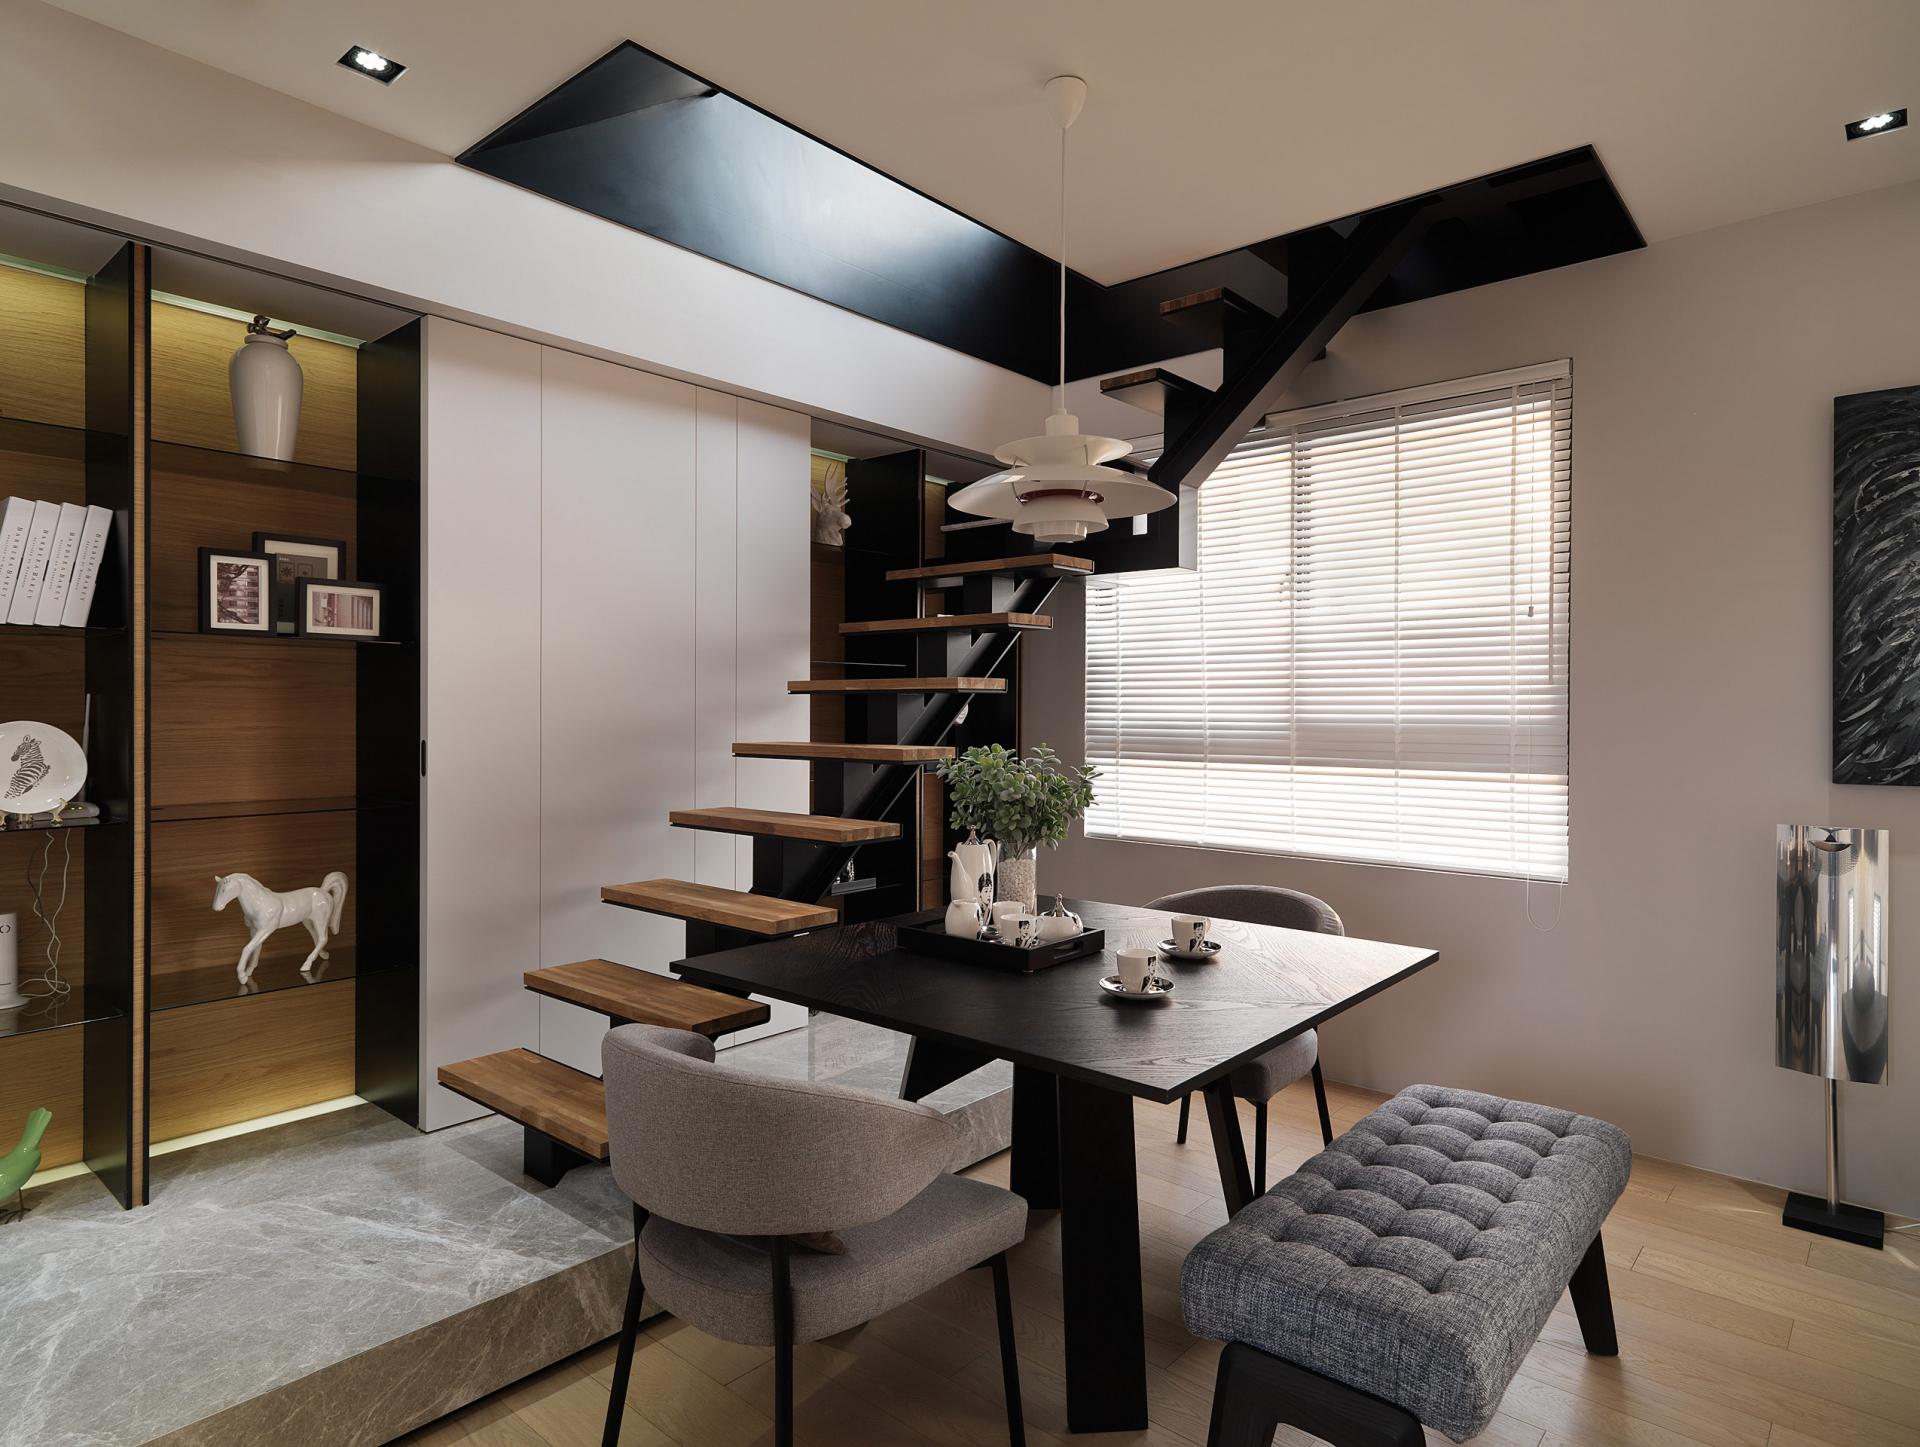 An Incredible Transformation For A 355-Square-Feet Home